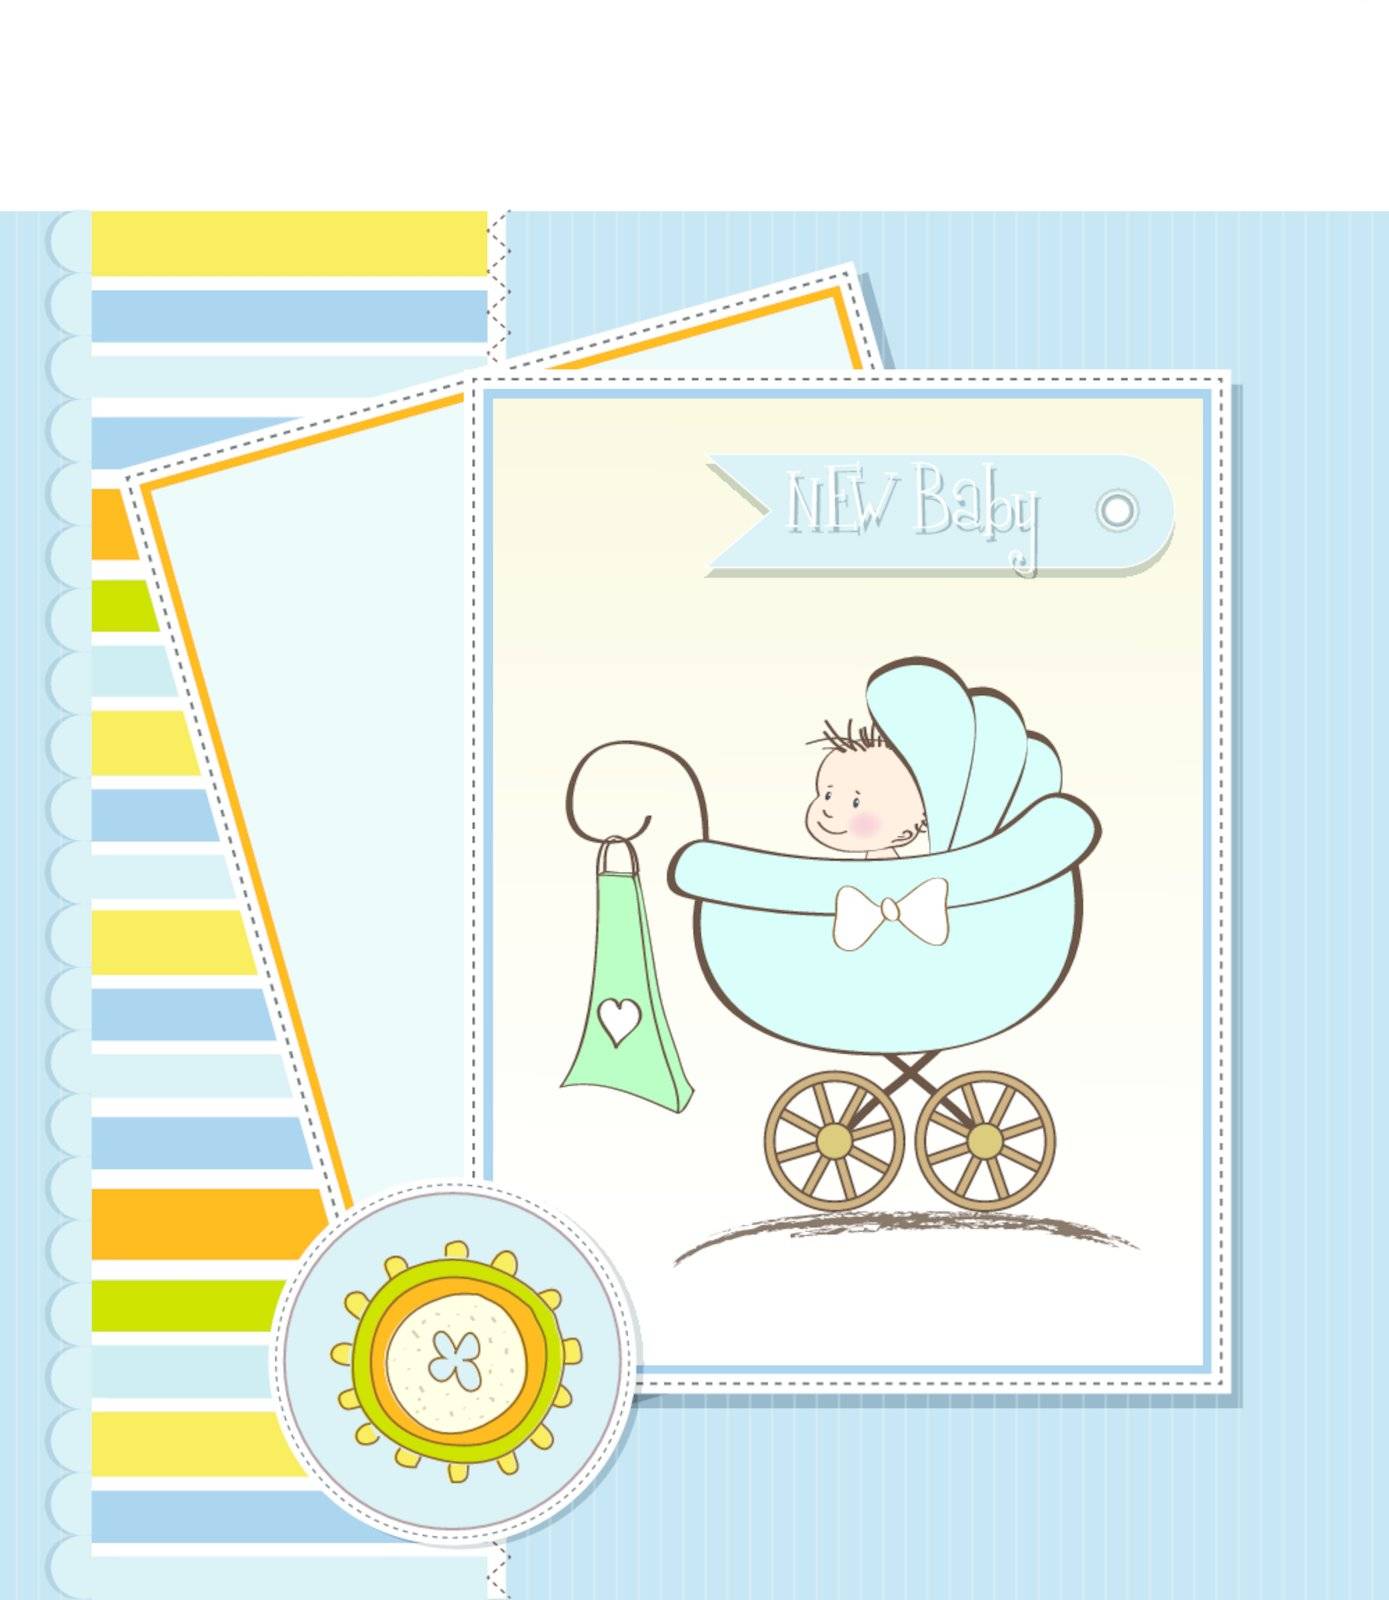 baby boy announcement card with baby and pram by balasoiu